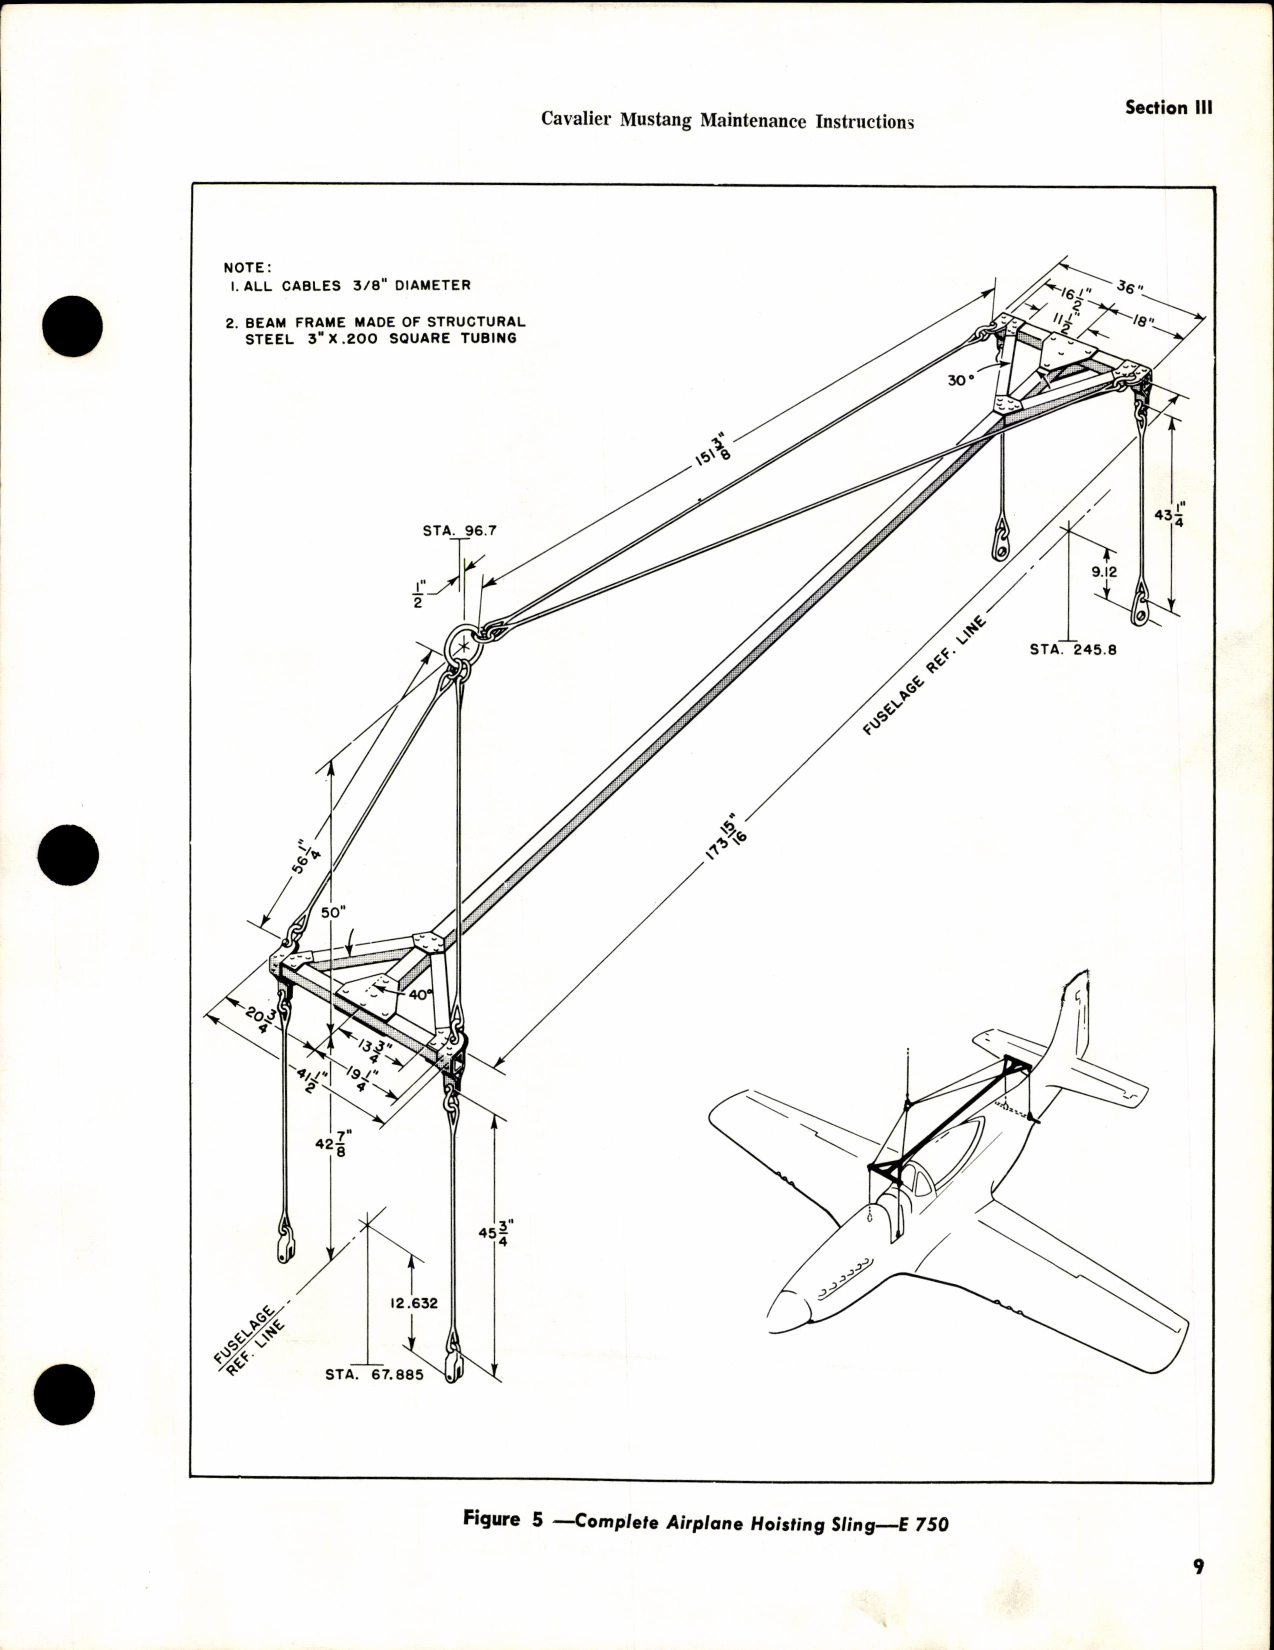 Sample page 13 from AirCorps Library document: Maintenance Instructions - Cavalier Mustang - F-51D